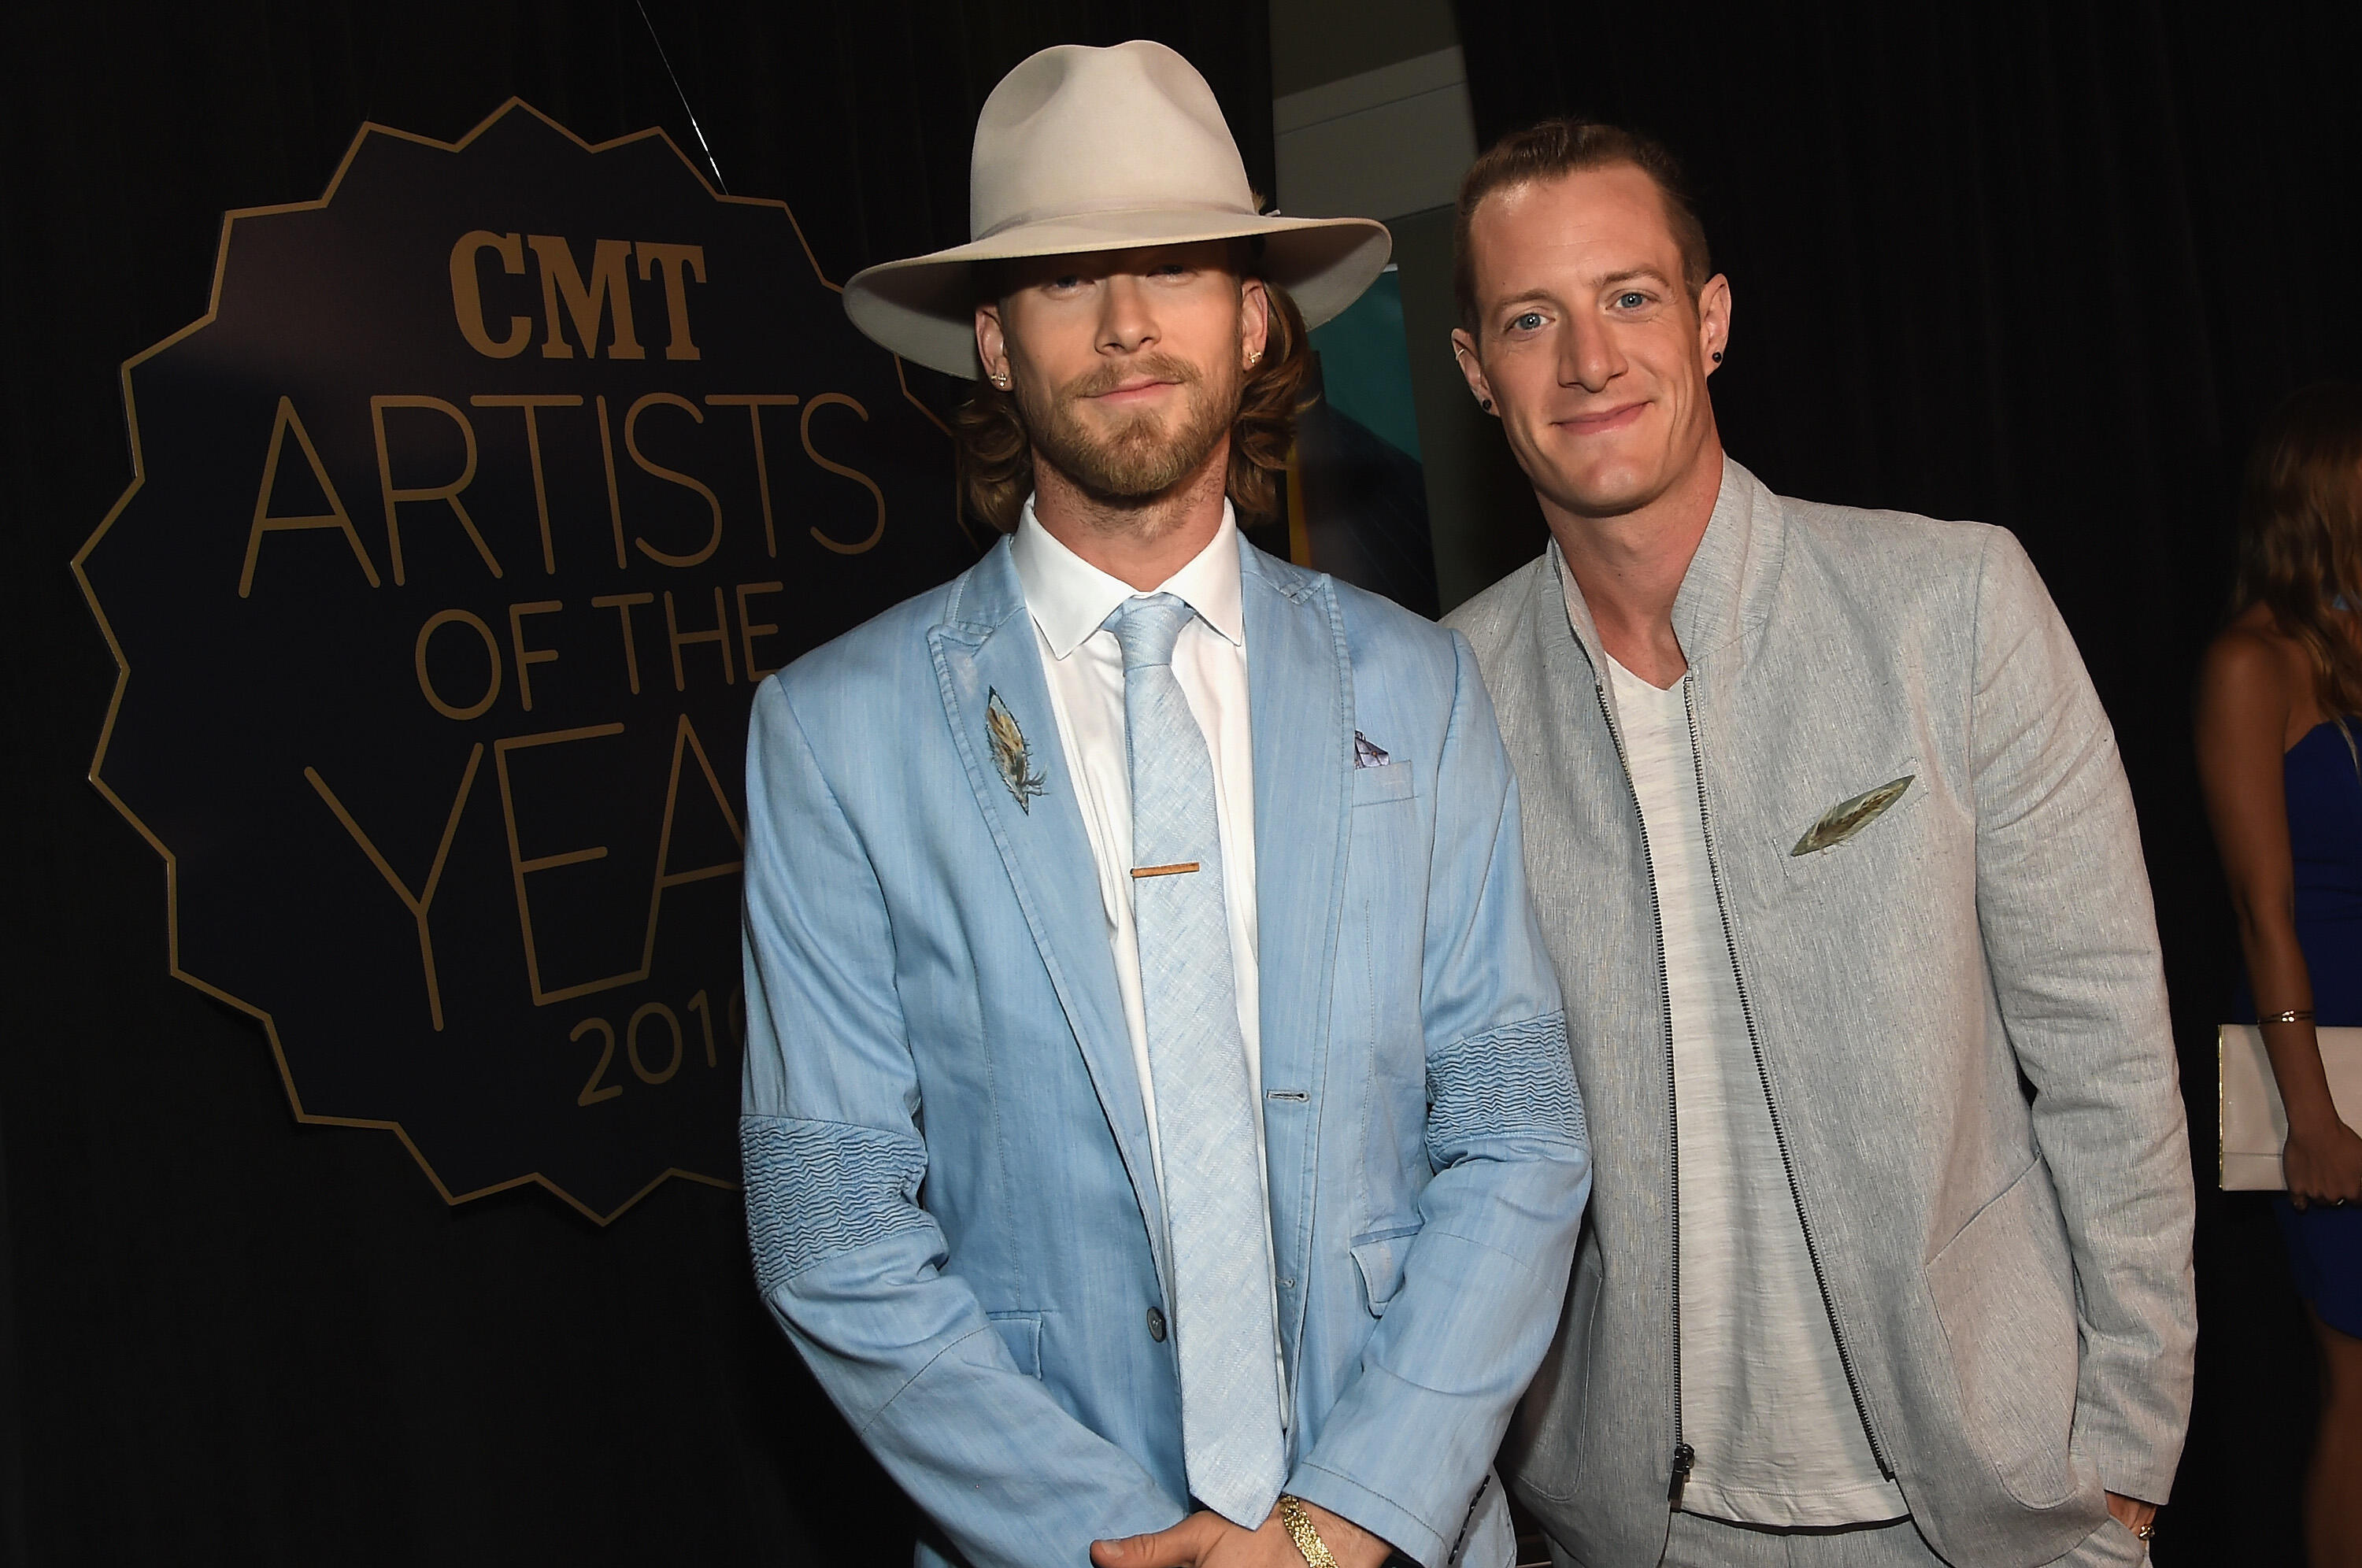 NASHVILLE, TN - OCTOBER 19:  Brian Kelley (L) and Tyler Hubbard (R) of Florida Georgia Line arrive on the red carpet at CMT Artists of the Year 2016 on October 19, 2016 in Nashville, Tennessee.  (Photo by Rick Diamond/Getty Images for CMT)